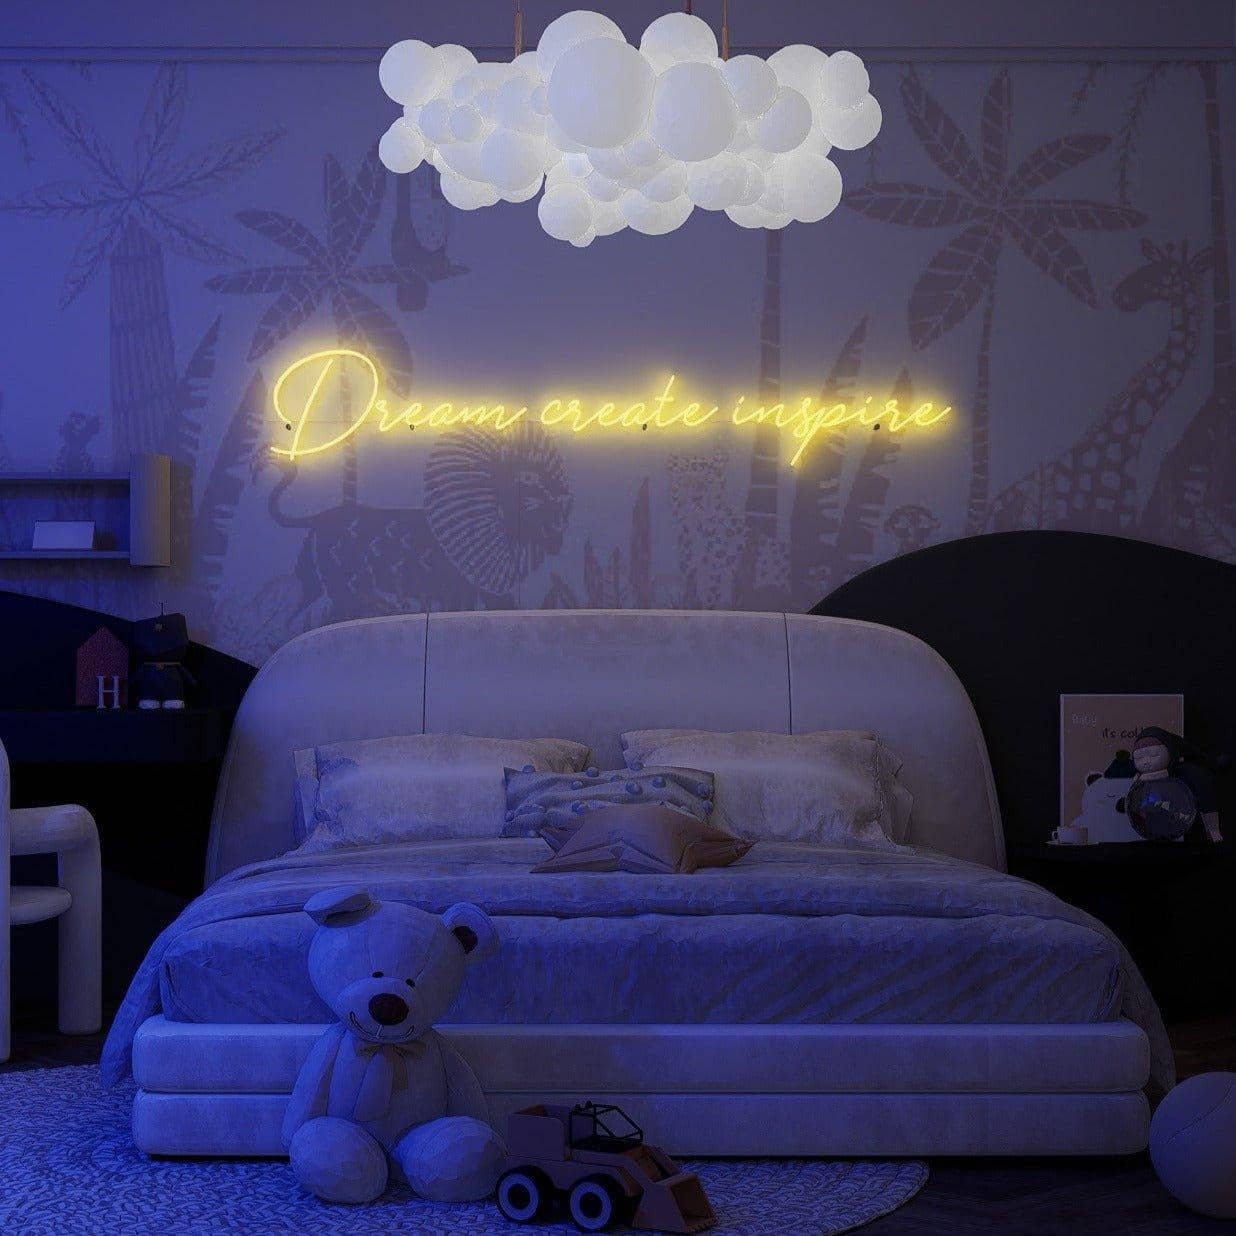 yellow-neon-lights-are-lit-up-and-displayed-in-the-bedroom-at-night-dream-creat-inspire